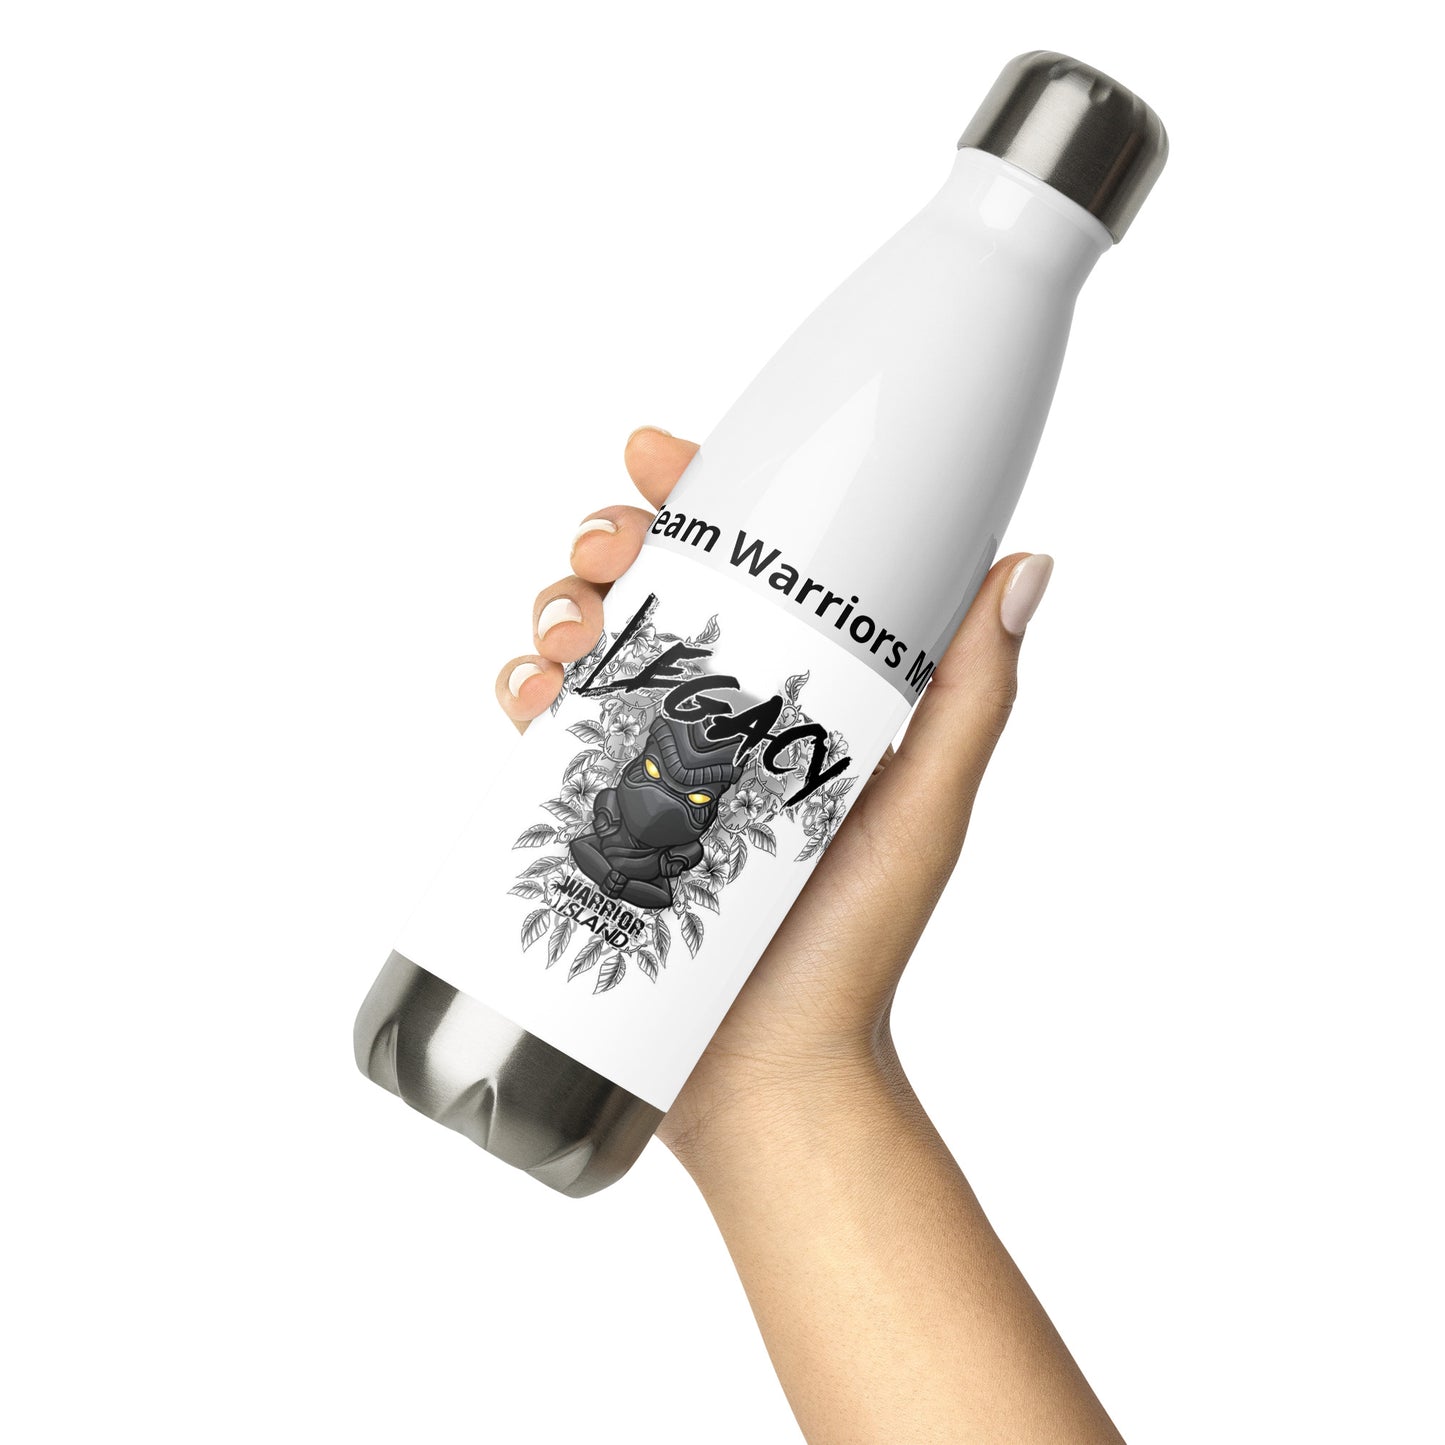 Team Warriors MP Legacy Stainless Steel Water Bottle